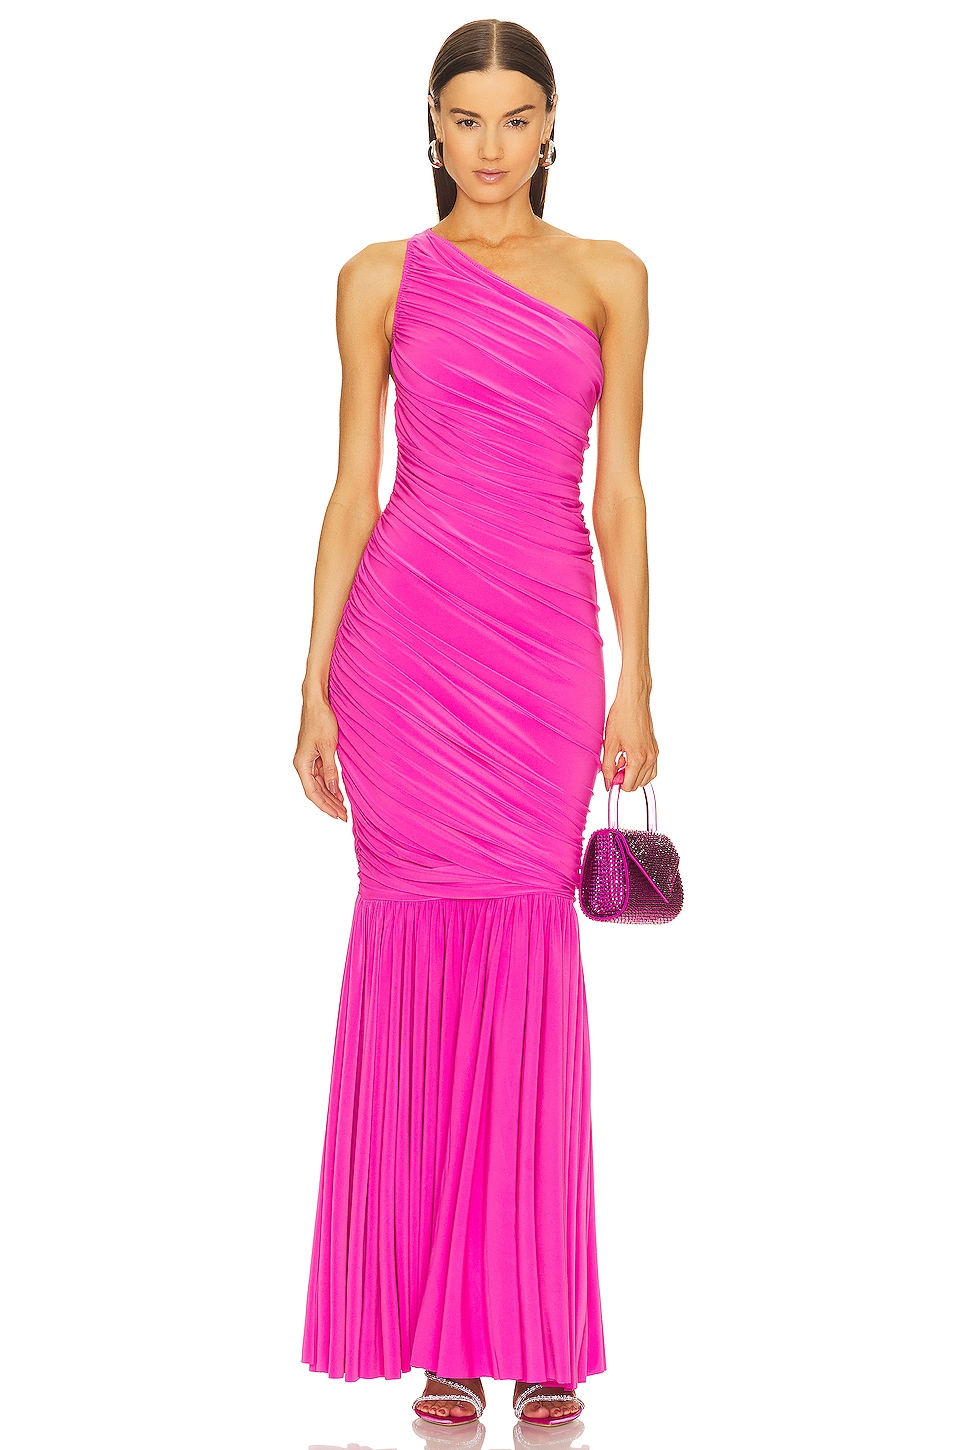 Norma Kamali Diana Fishtail Gown in Orchid Pink | REVOLVE